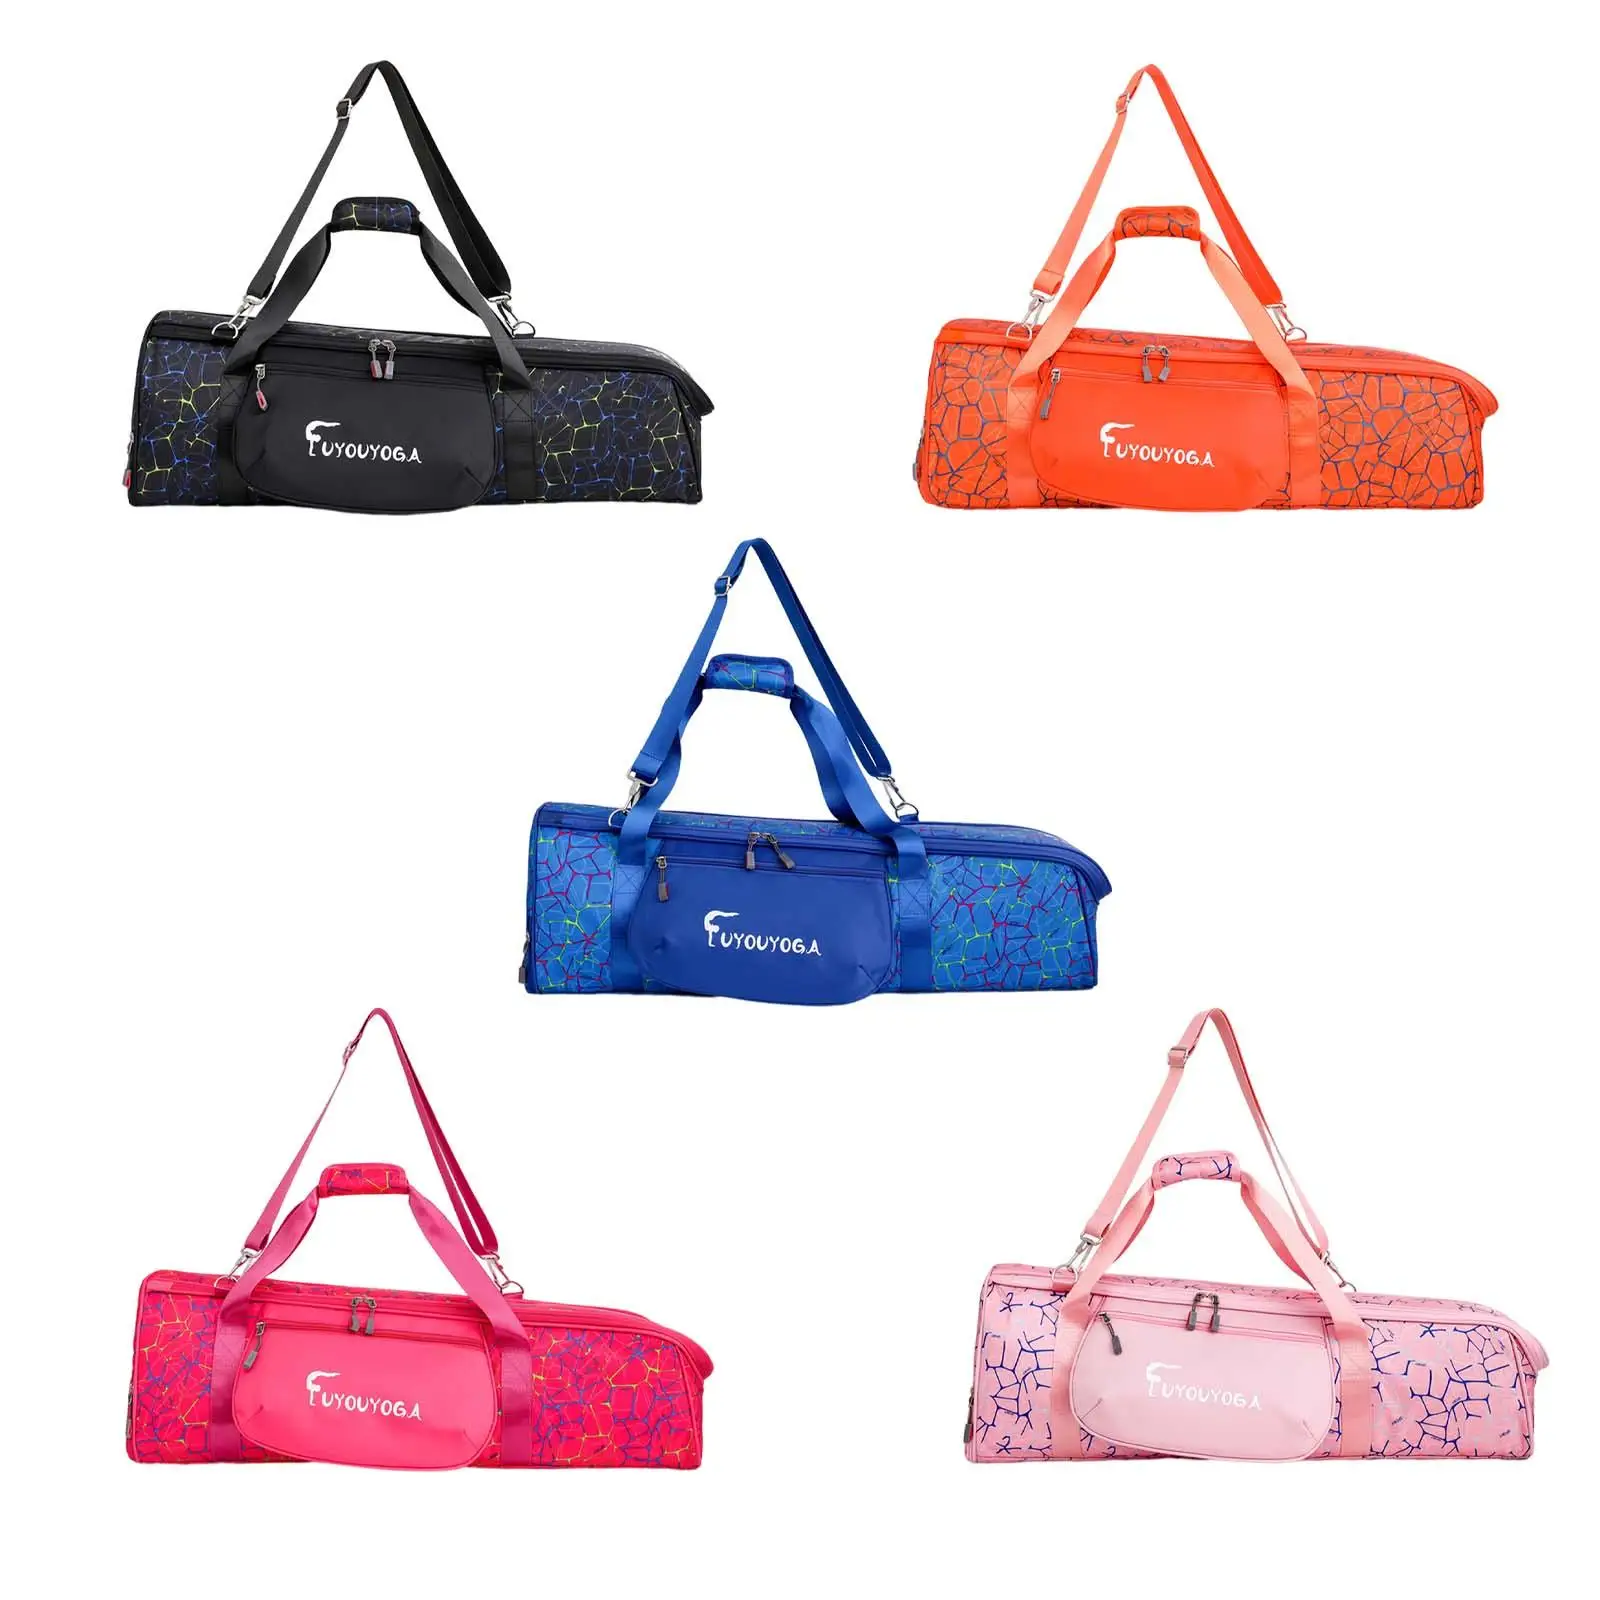 Yoga Mat Carrier Case with Handle Tote Large Yoga Bags Yoga Mat Holder Storage Bag for Beach Workout Shopping Exercise Outdoor